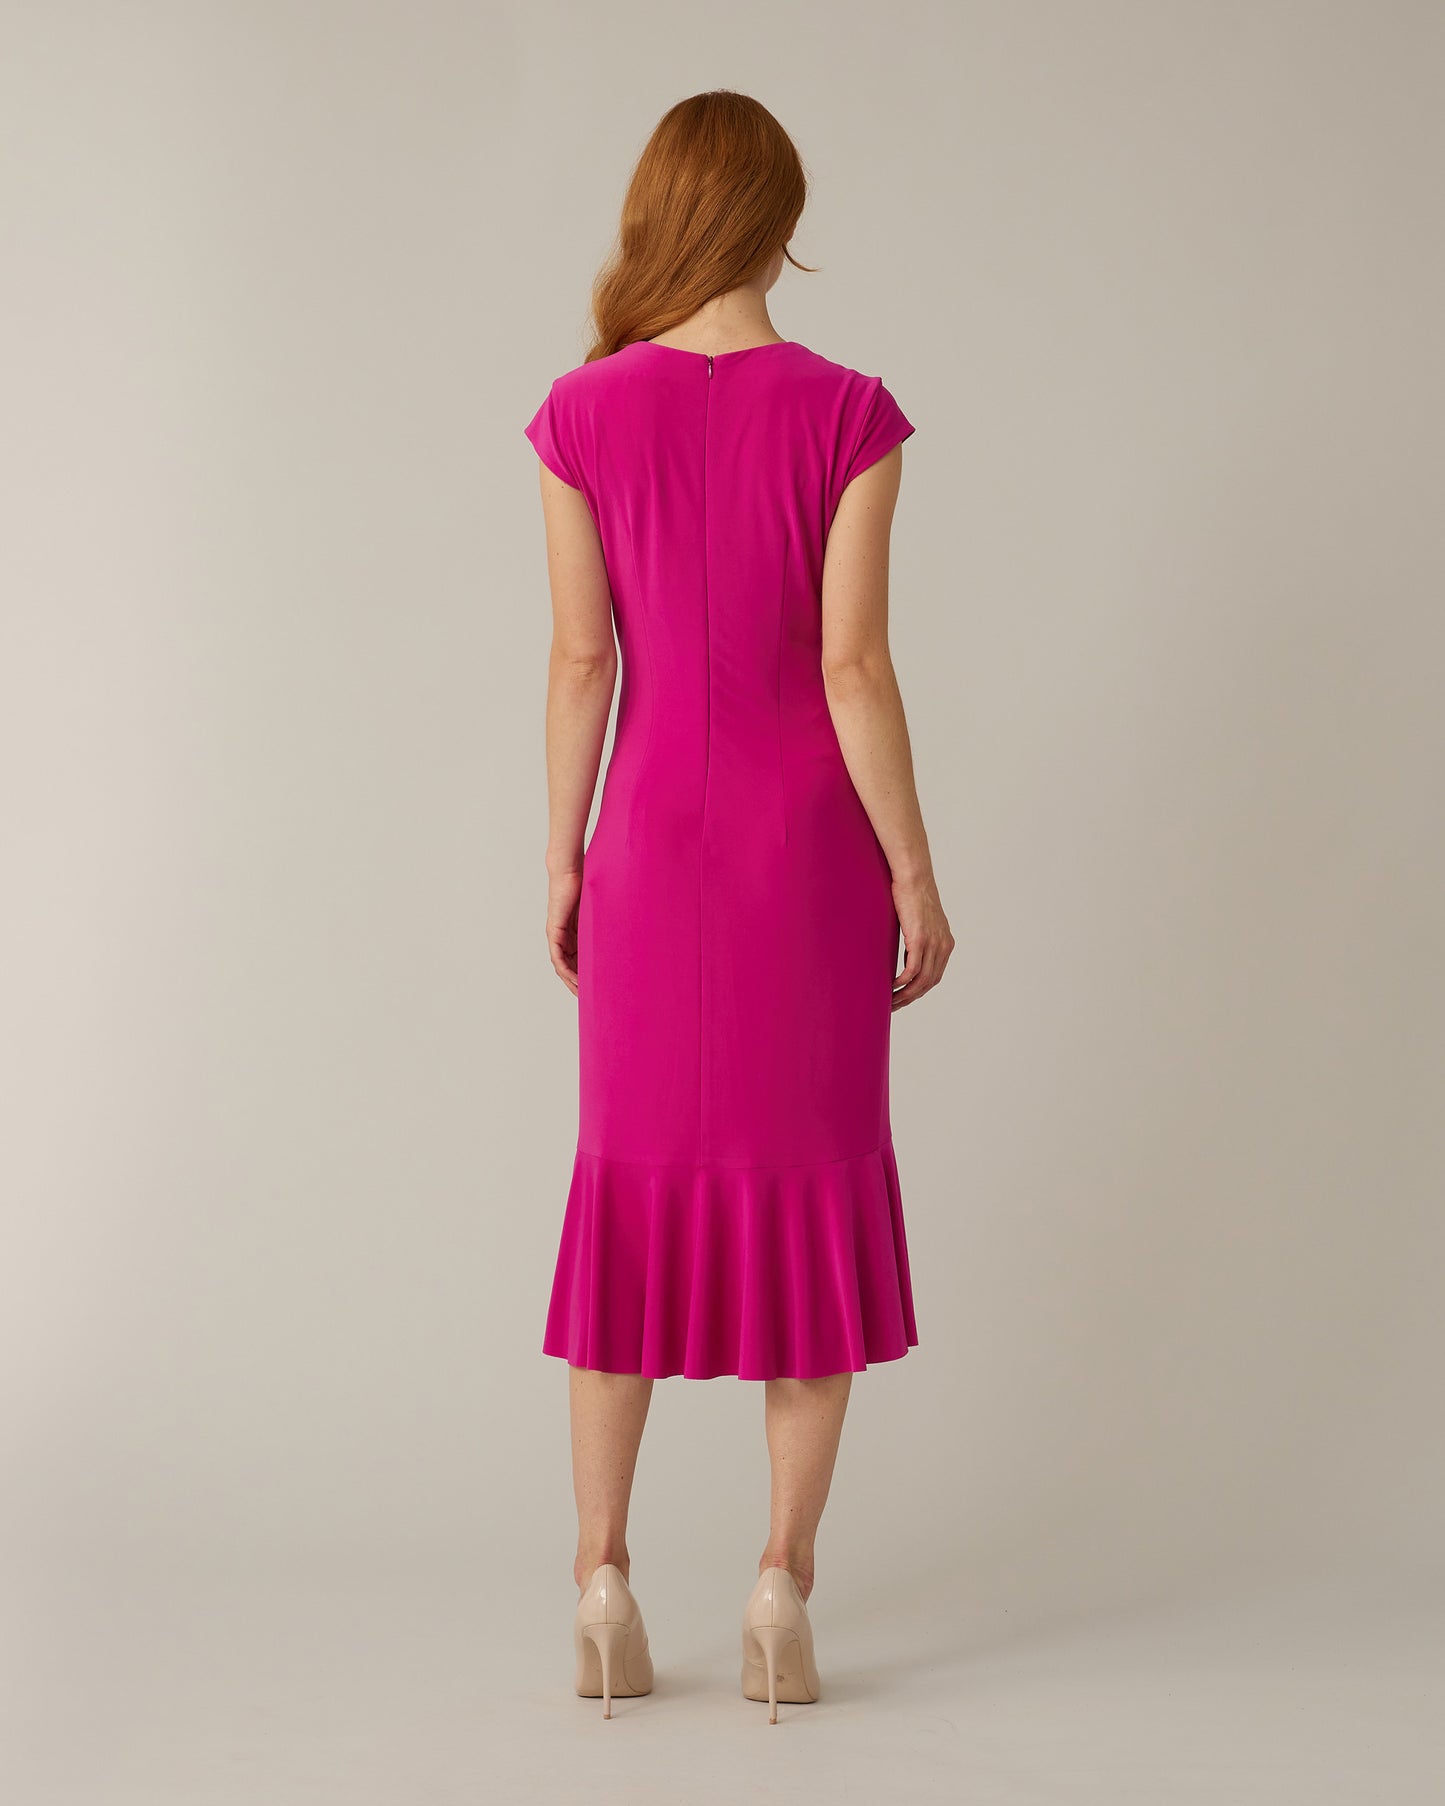 Joseph Ribkoff - Wrap Style Dress - Style 221364 - Orchid 50% off - size 12 left